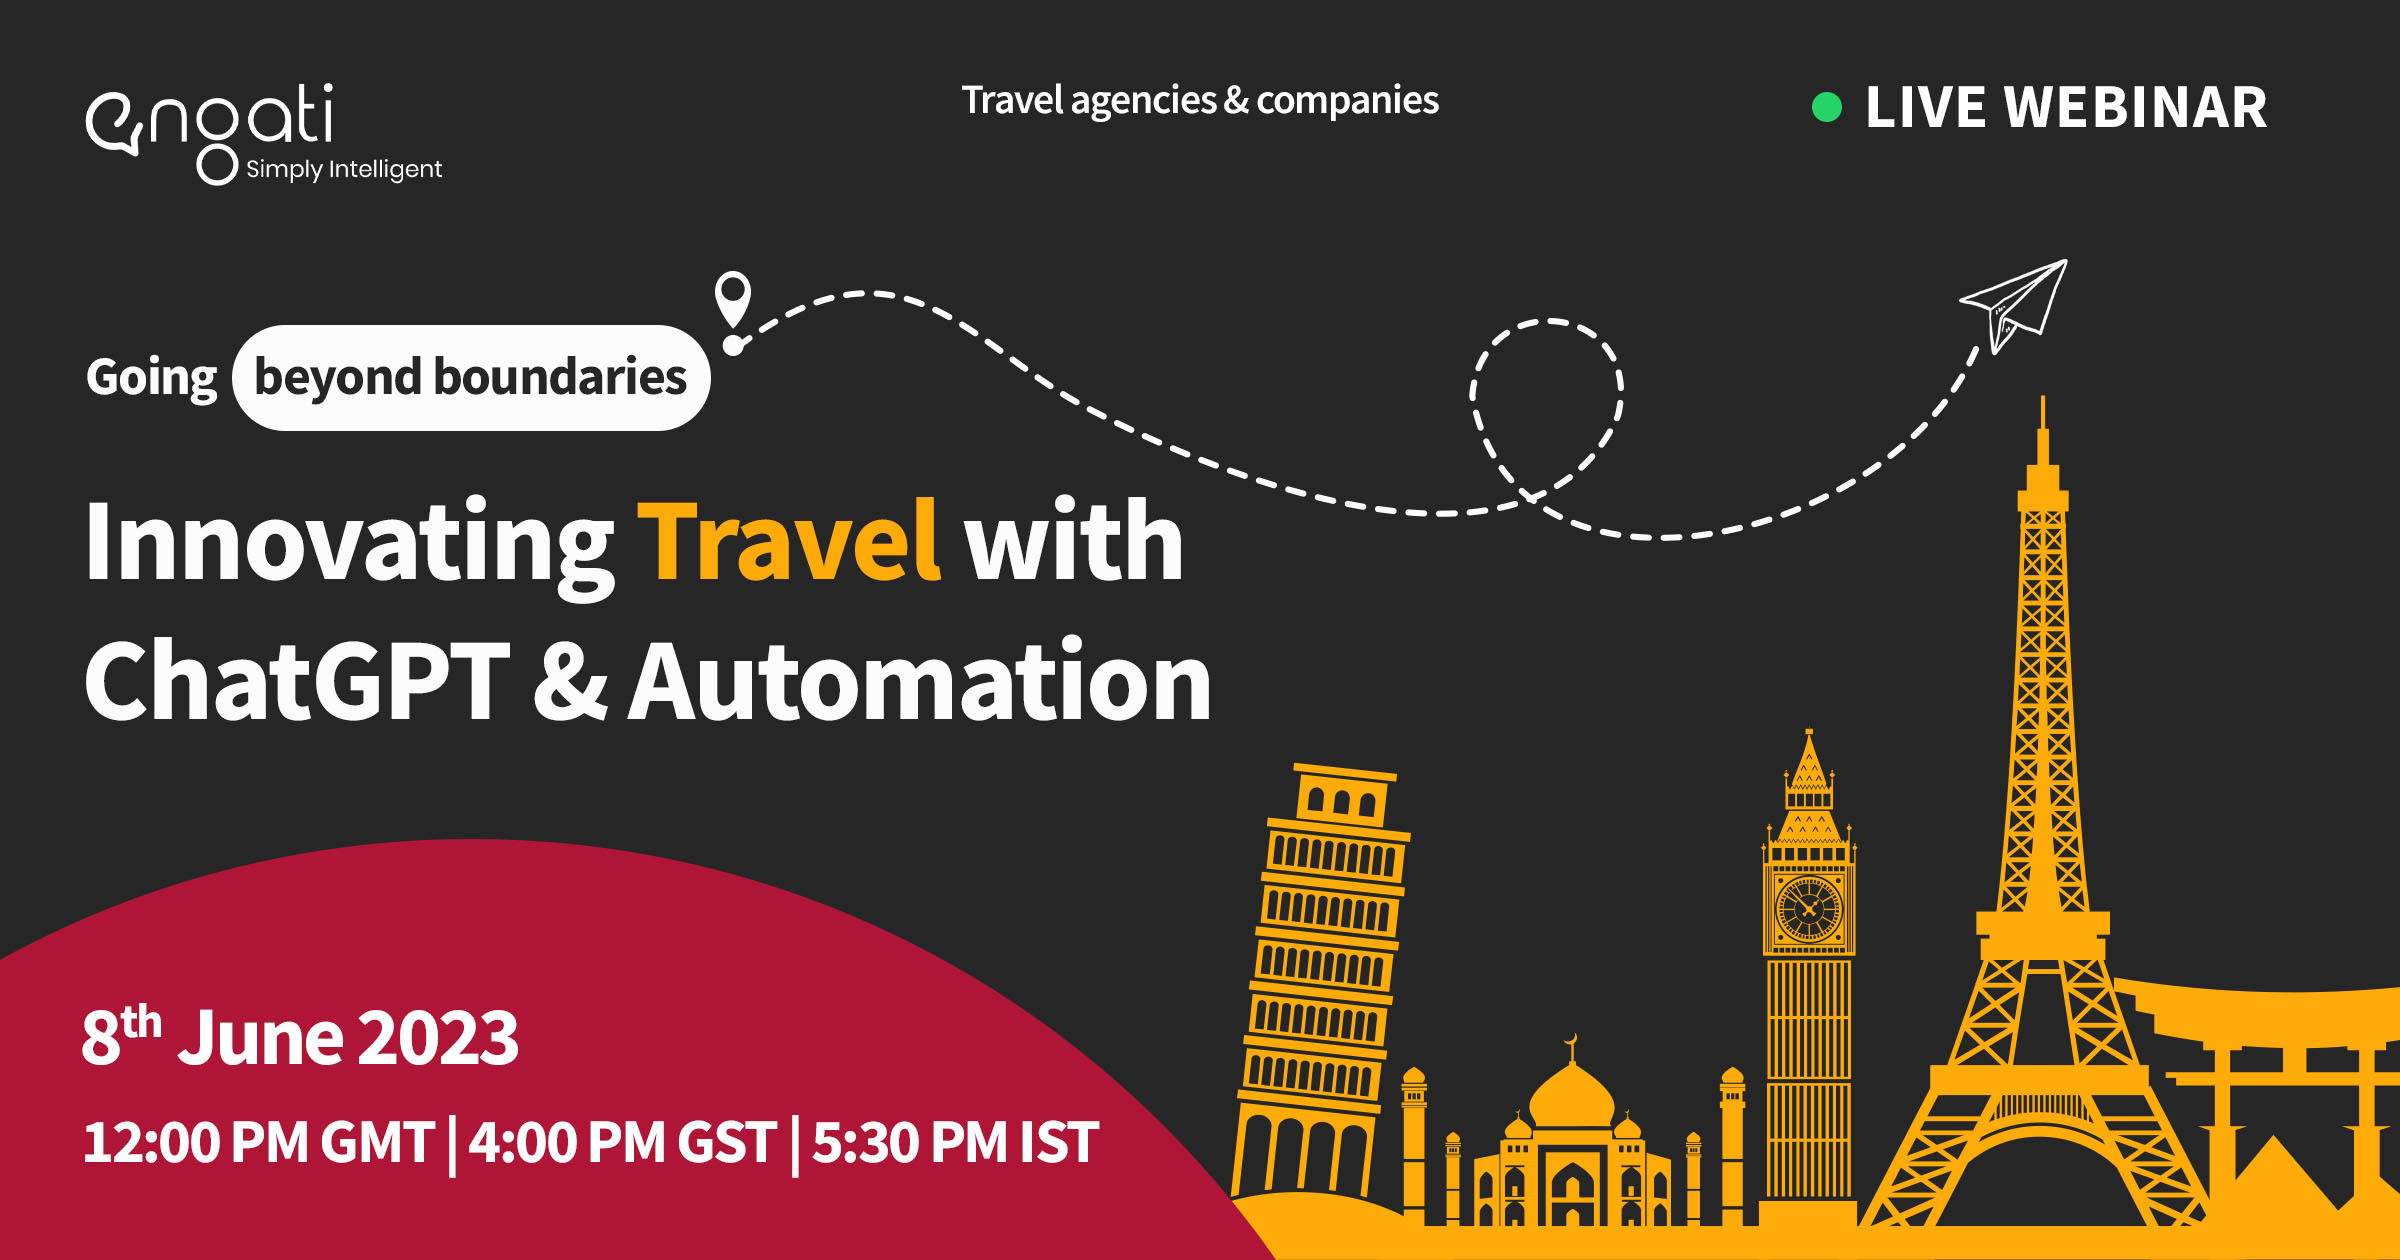 ChatGPT + Automation in Travel and Automation